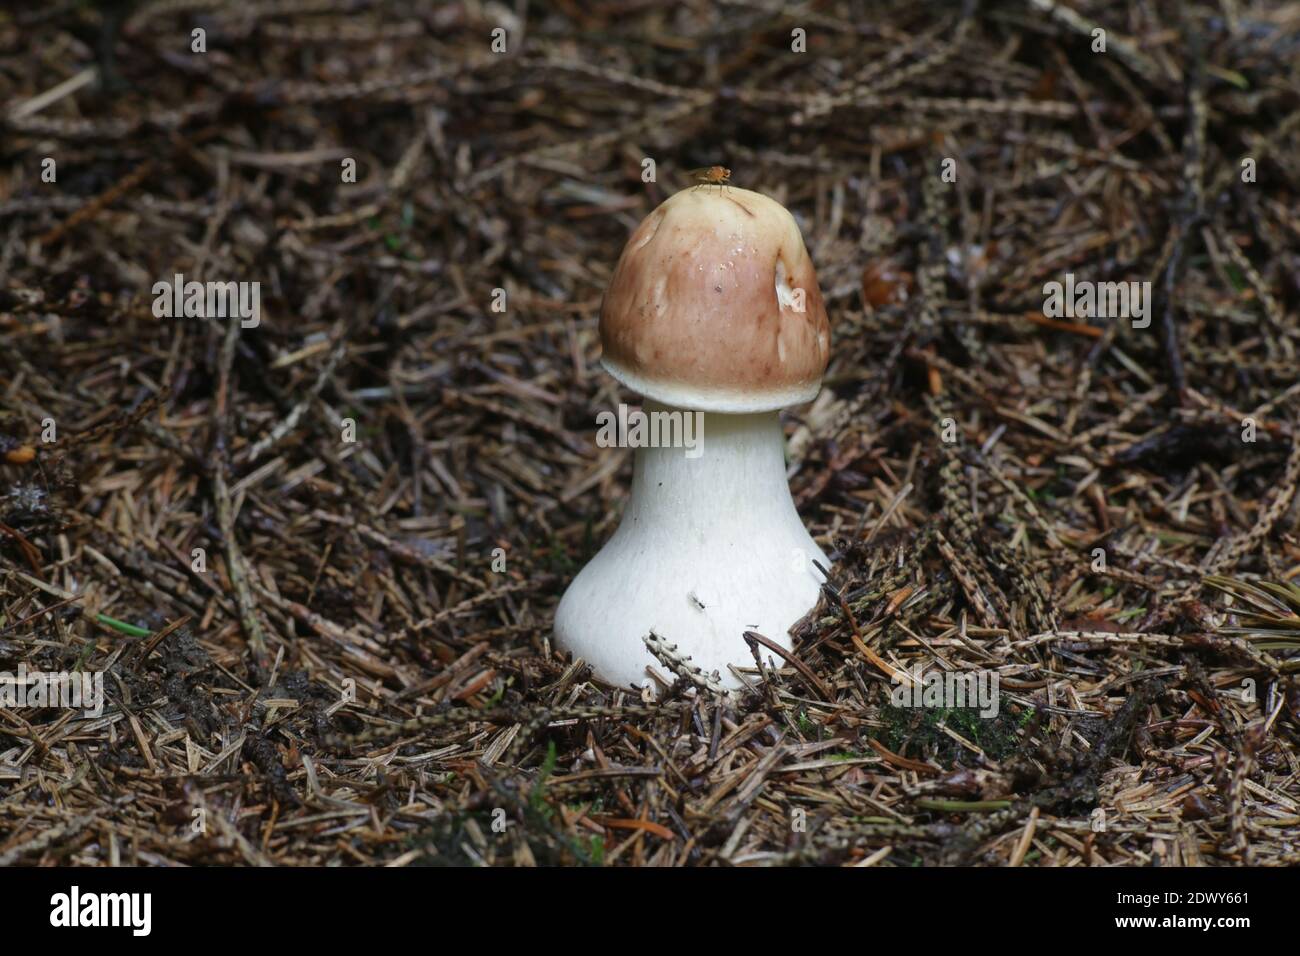 Chlorophyllum olivieri, known as Olive Shaggy Parasol, wild mushrooms from Finland Stock Photo